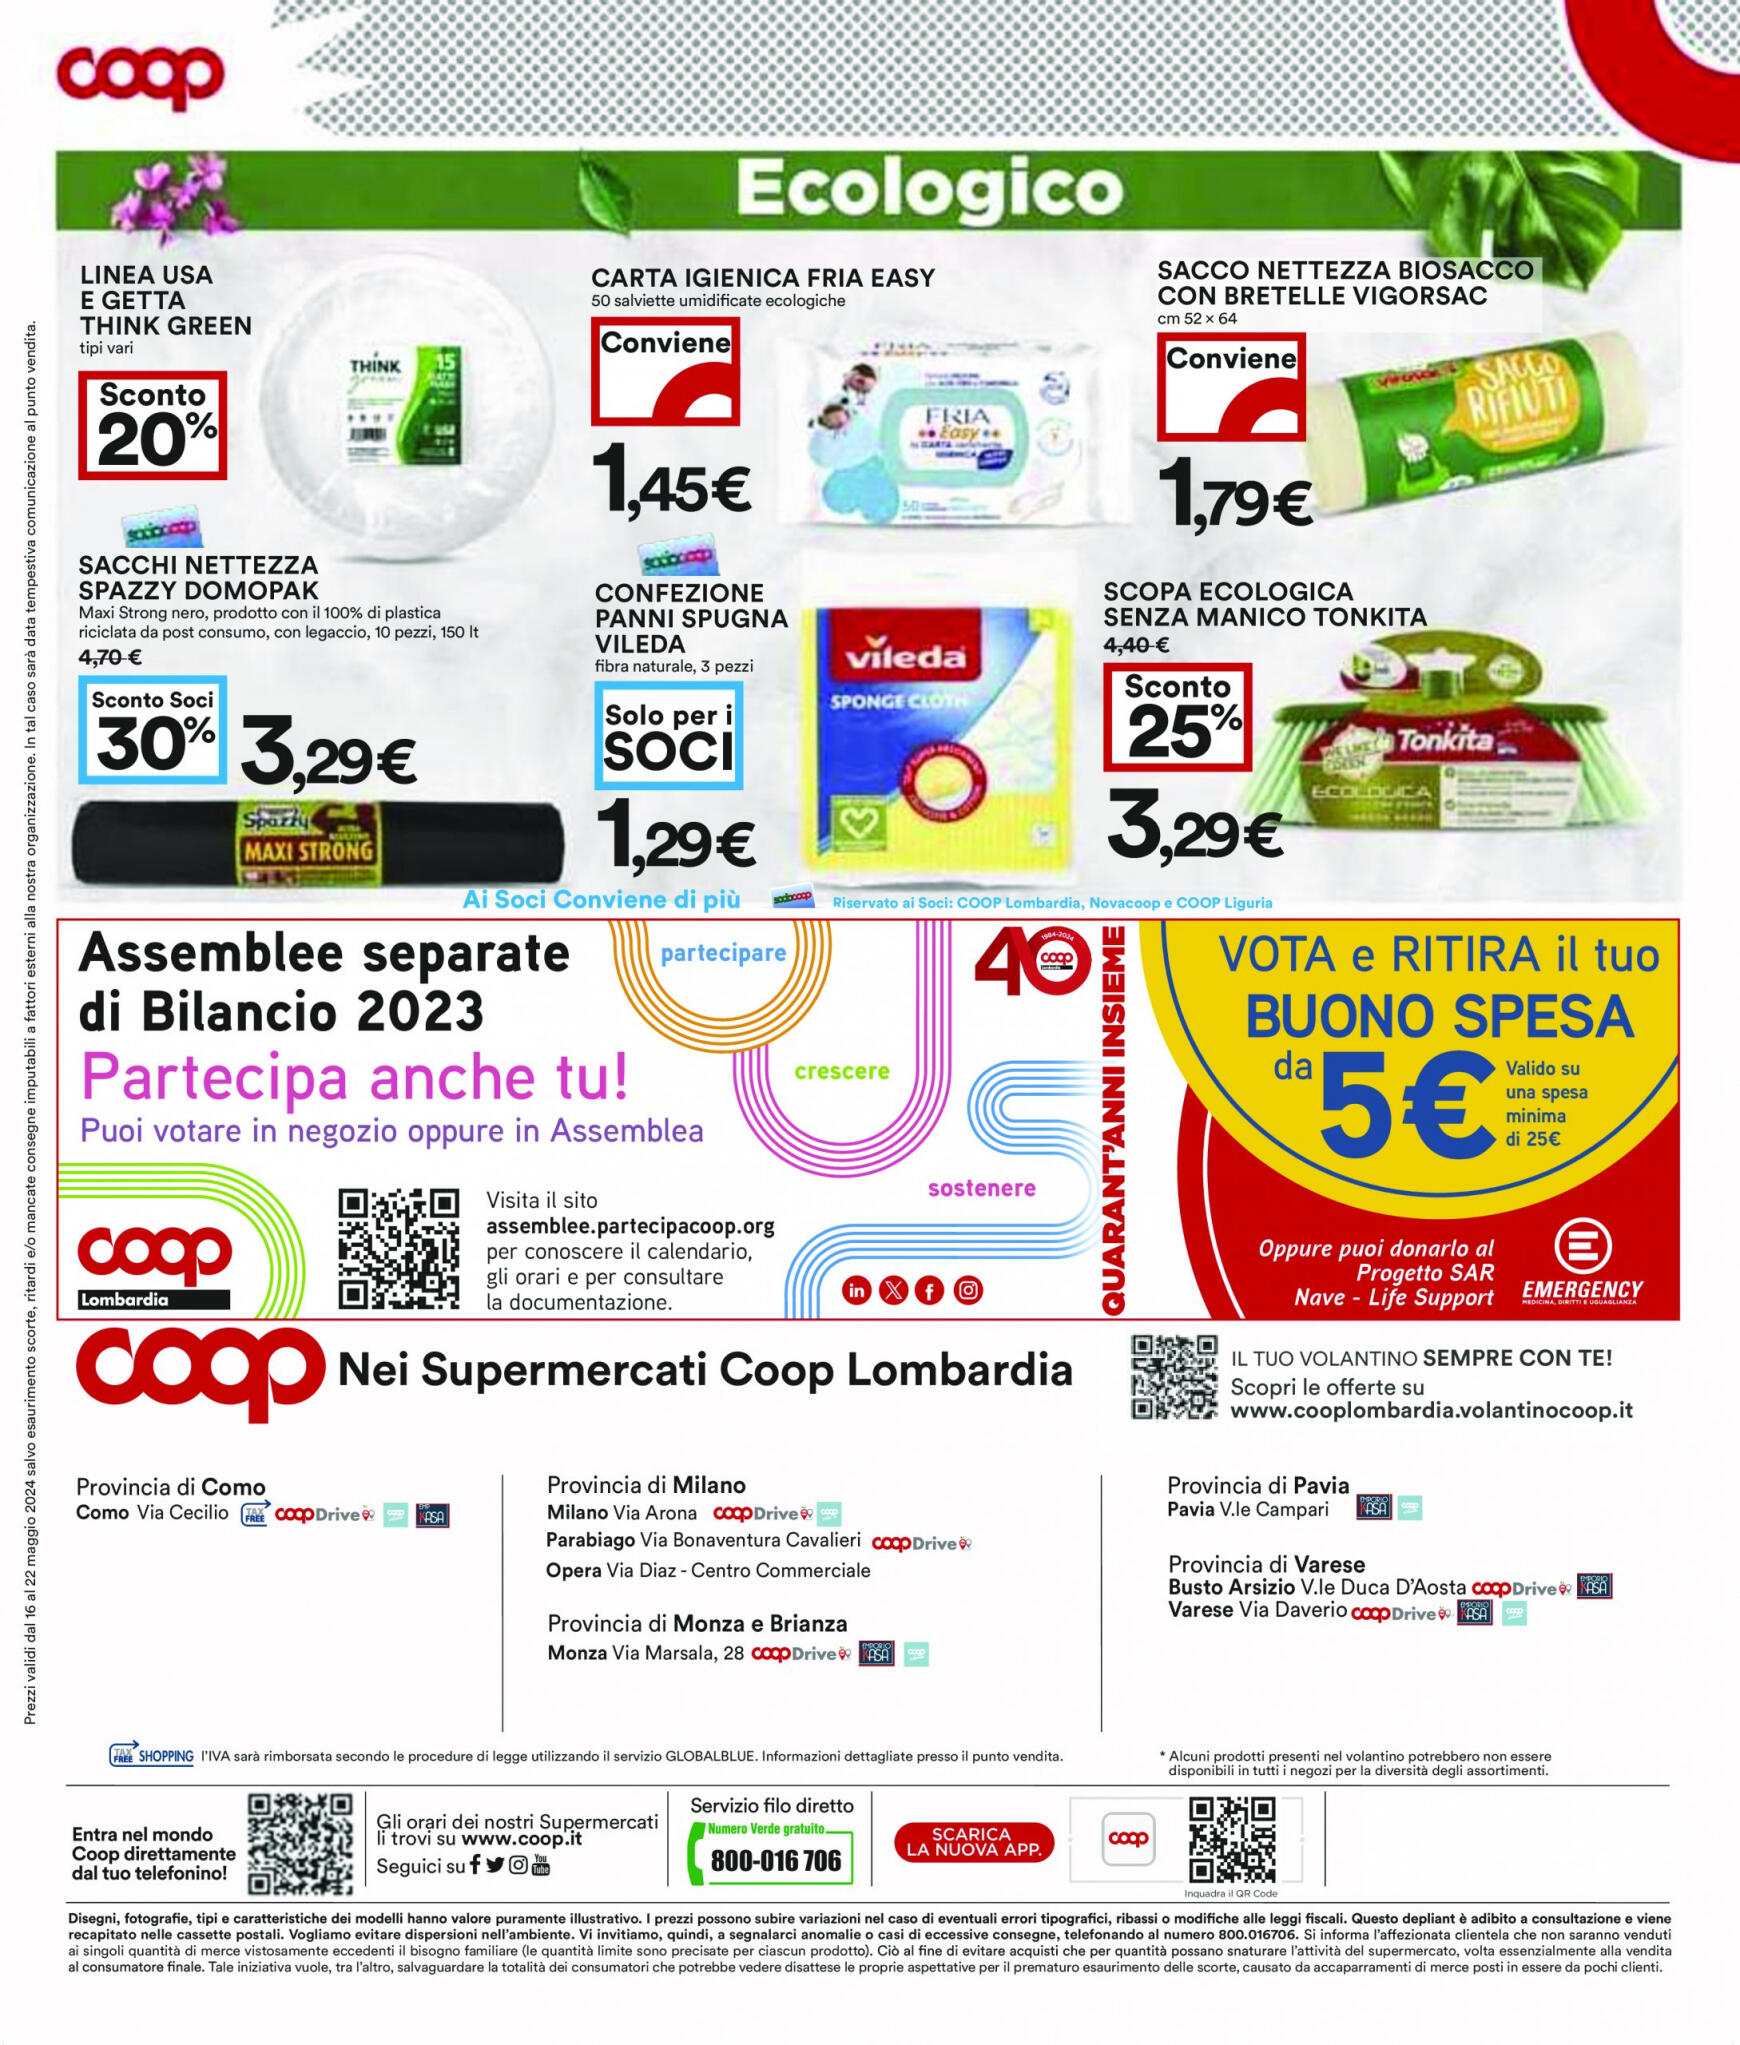 coop - Nuovo volantino Coop 16.05. - 22.05. - page: 18